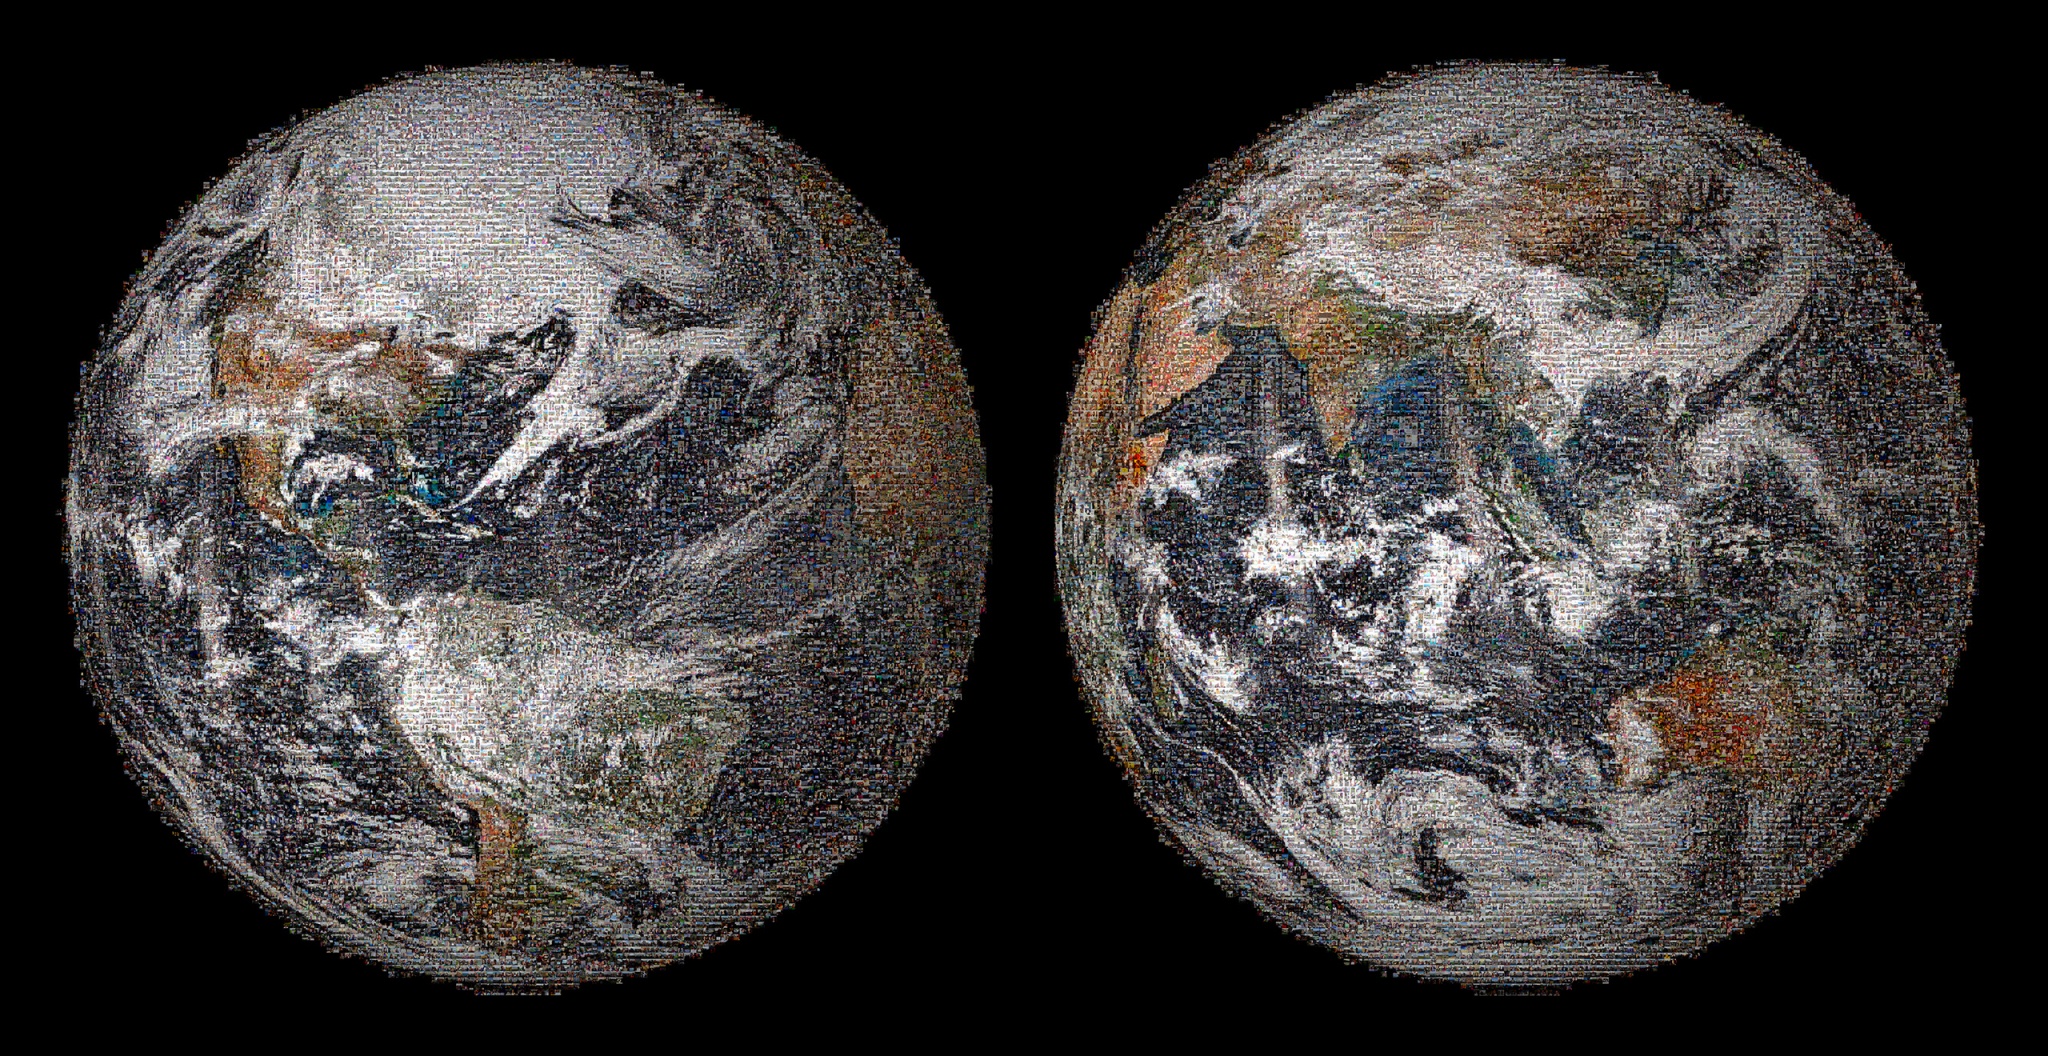 A "Global Selfie" mosaic,  built using more than 36,000 individual photographs drawn from the more than 50,000 images tagged #GlobalSelfie and posted on or around Earth Day, April 22, 2014 on social media. NASA and NOAA